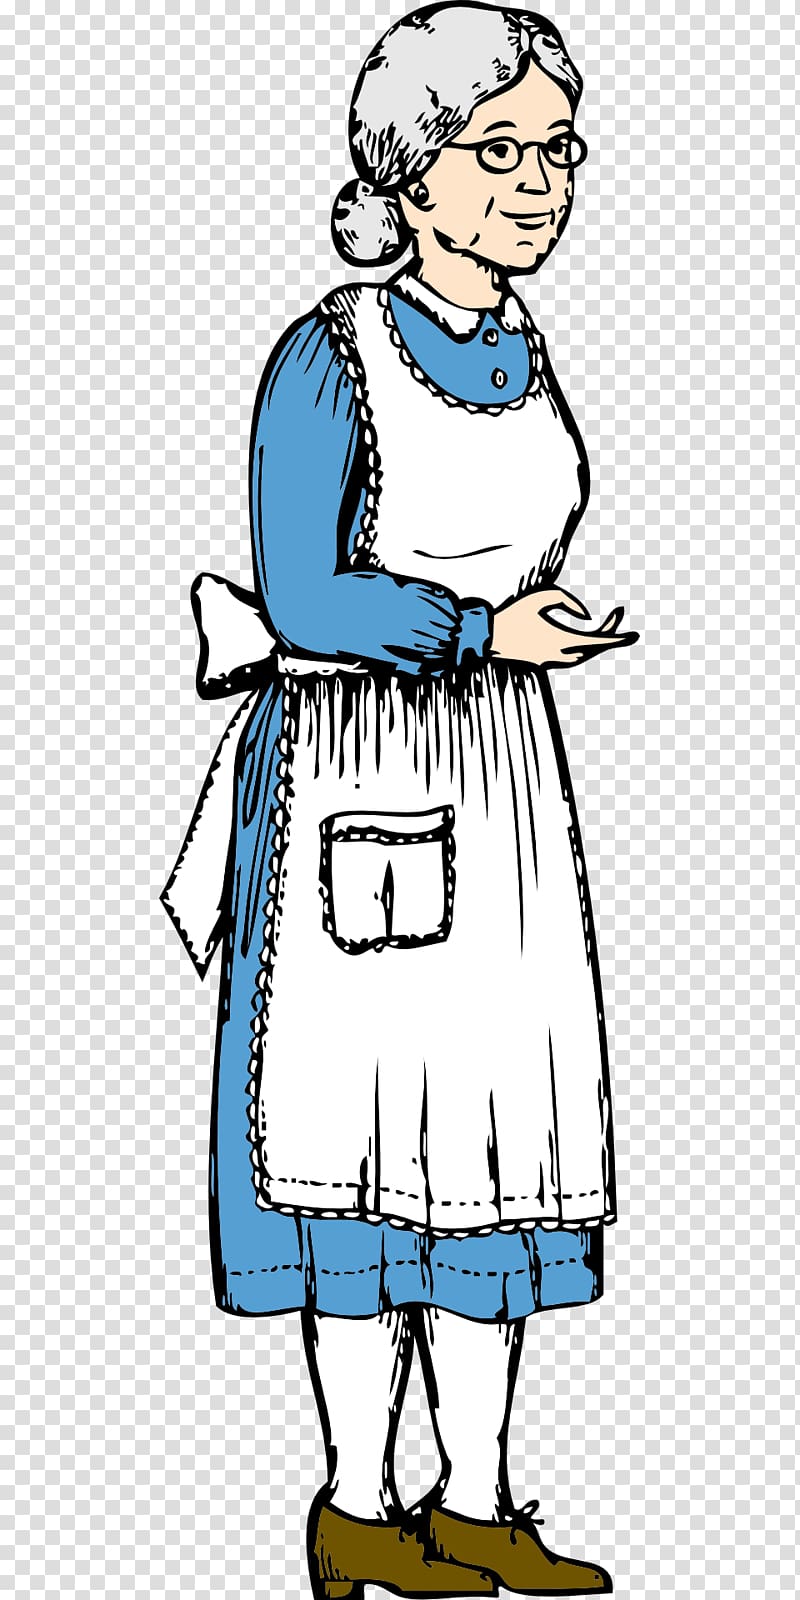 Bedford Public Library System Grandparent Drawing, grandma transparent background PNG clipart